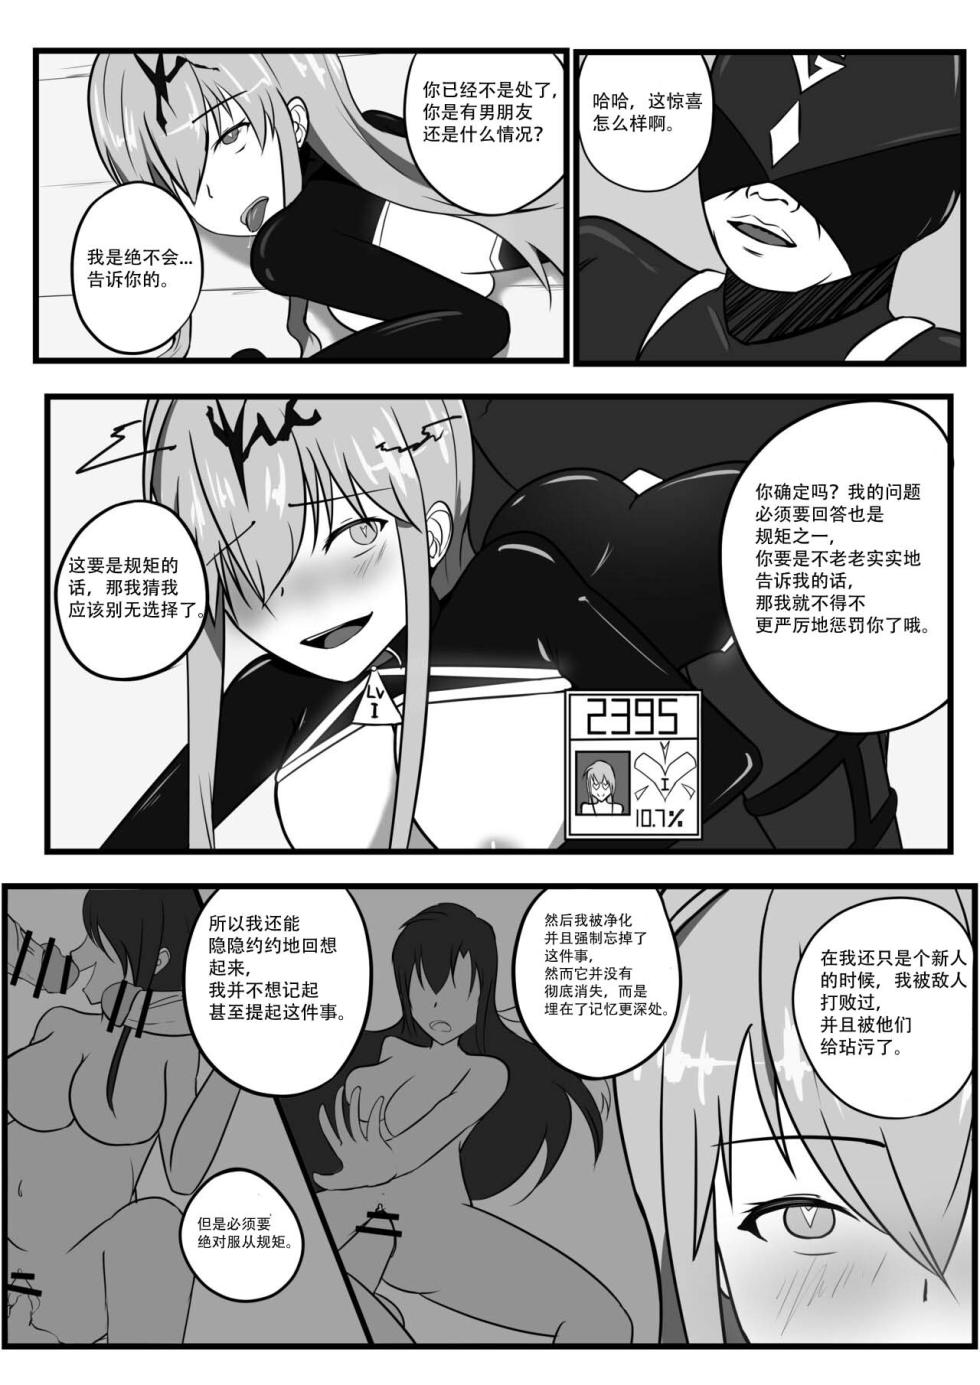 [Aynes] The Degradation of Angels [心海汉化组] - Page 13